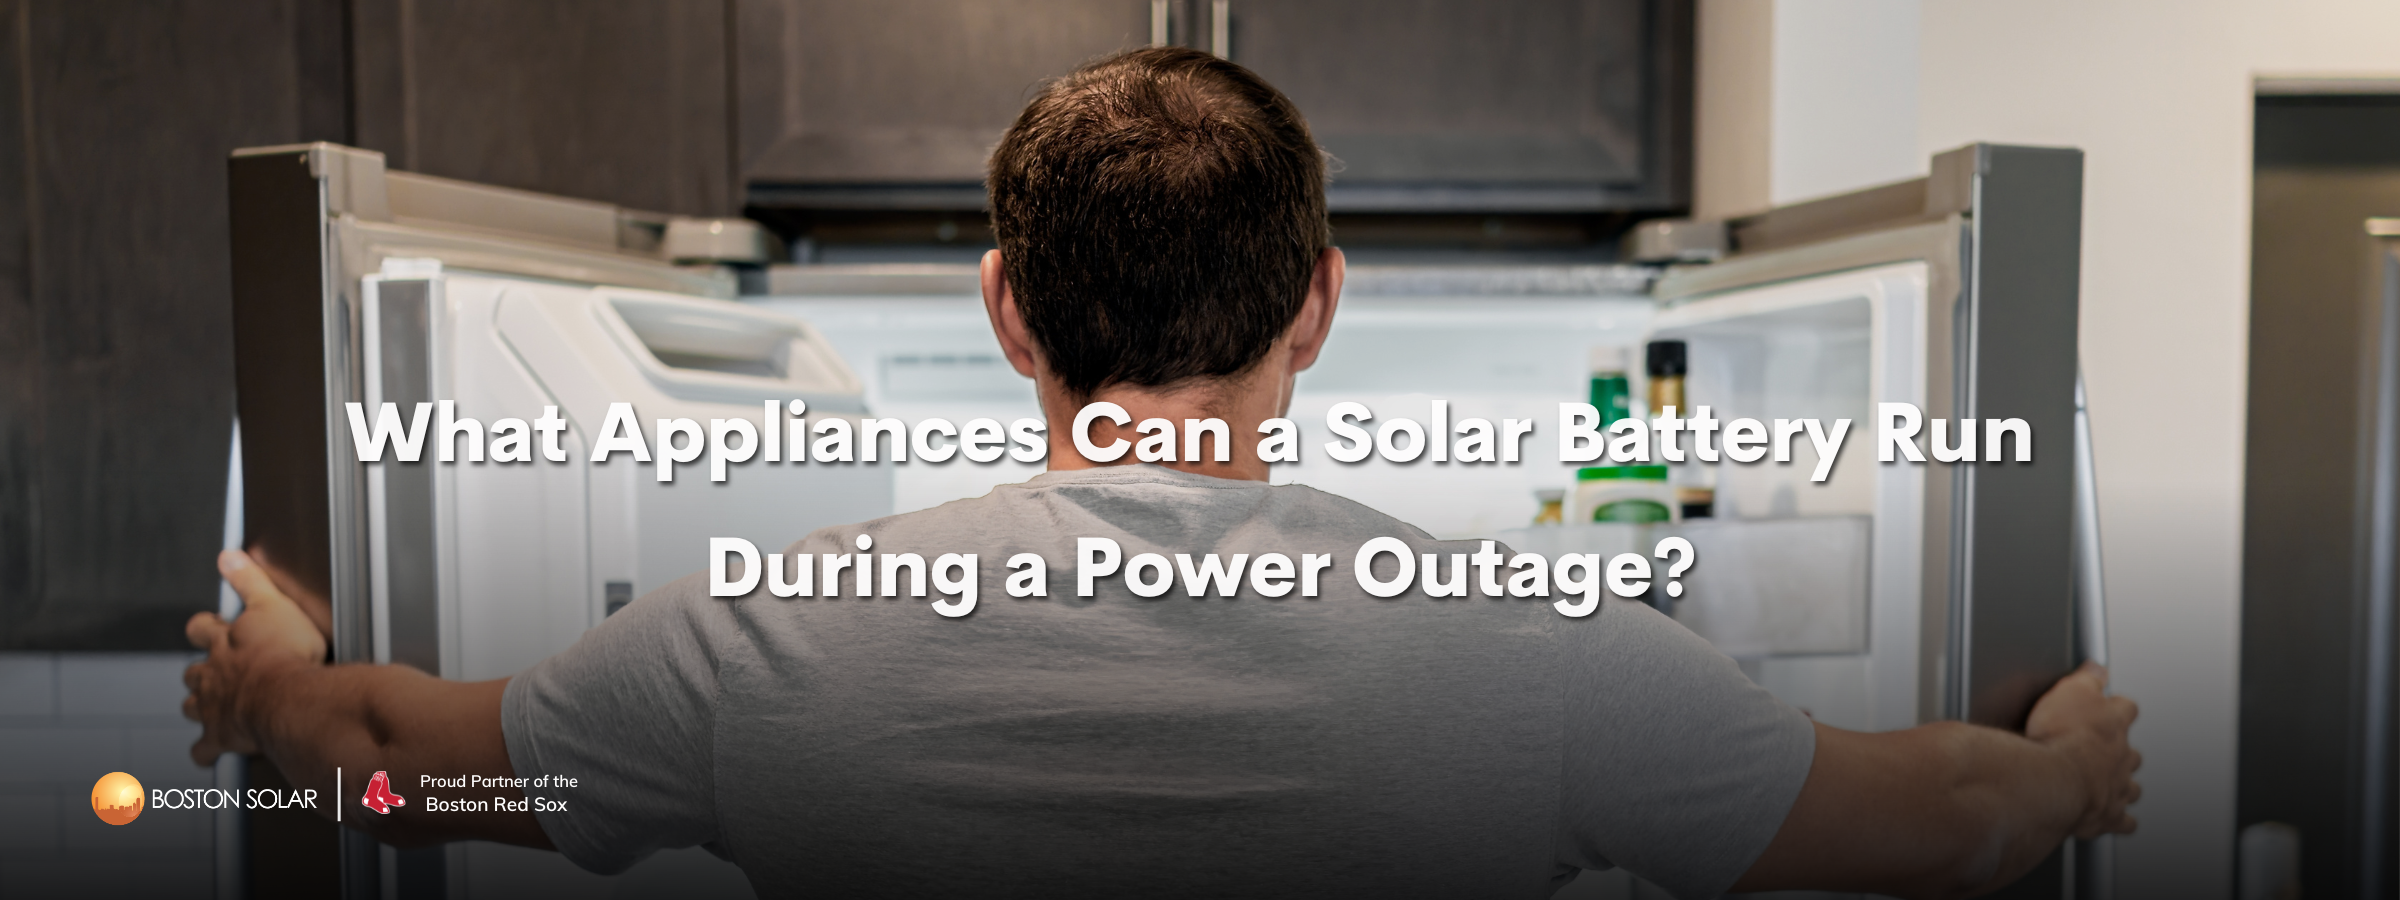 What Appliances Can a Solar Battery Run During a Power Outage?